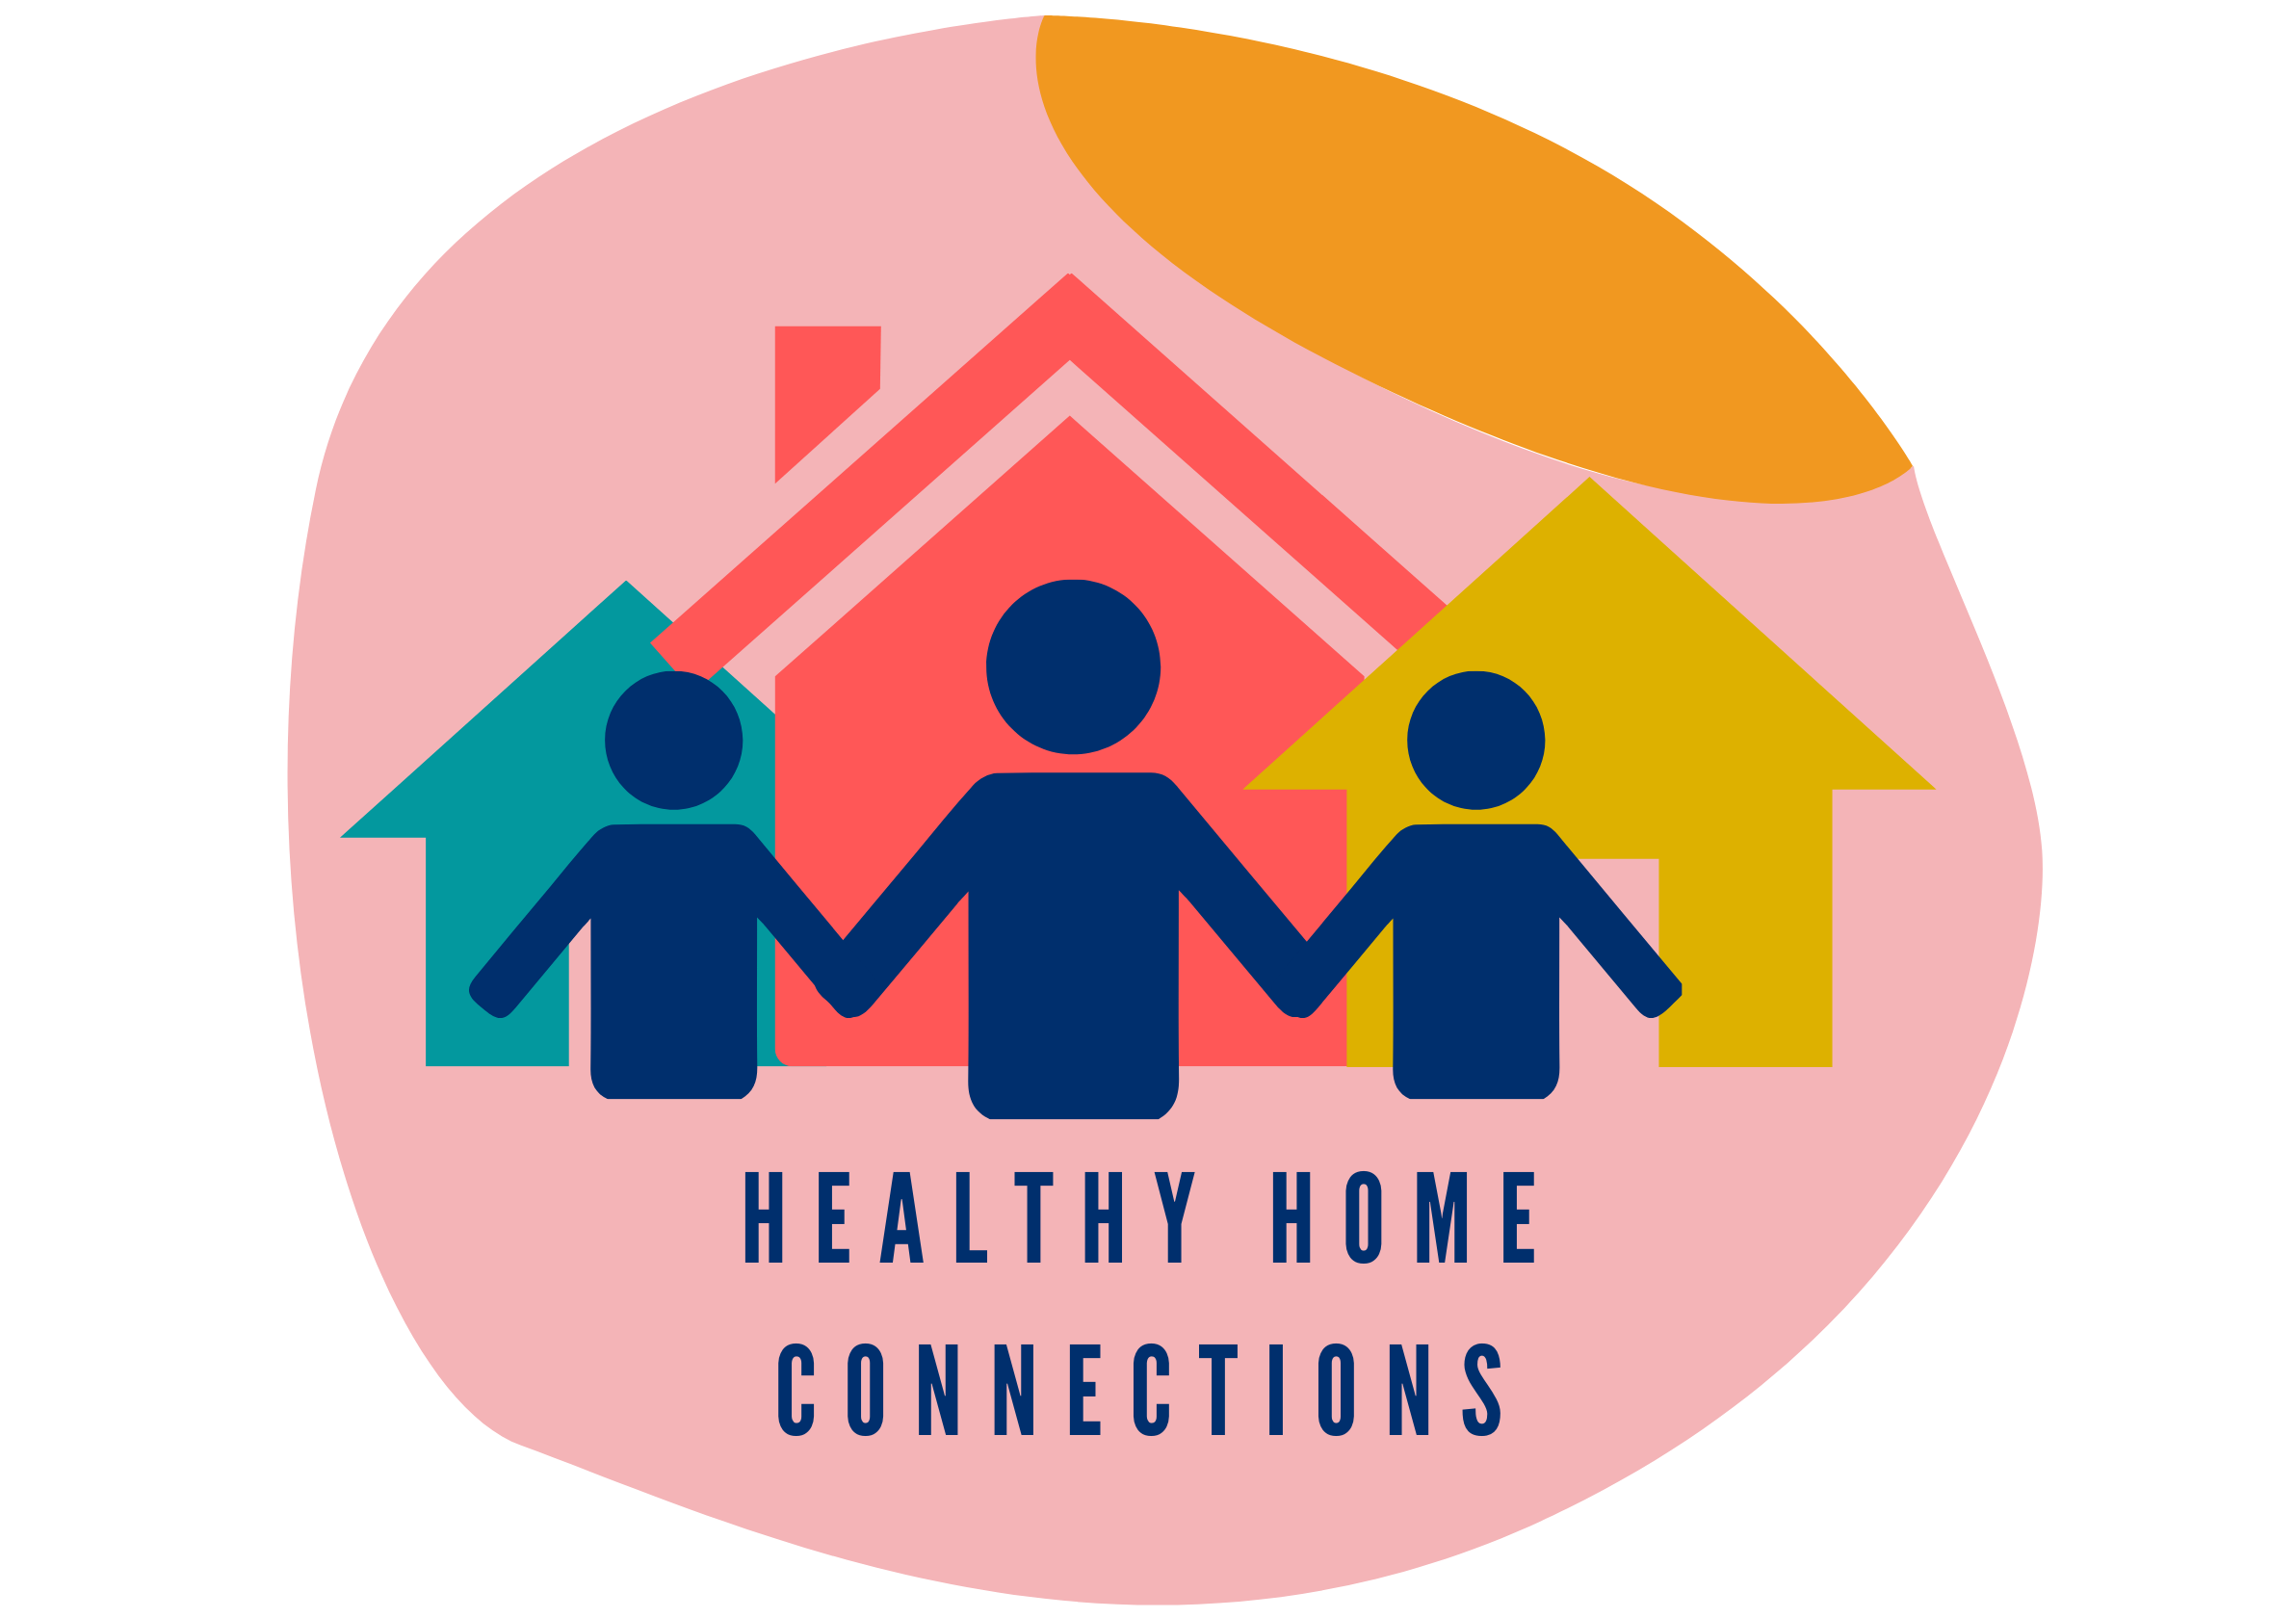 Healthy Home Connections logo